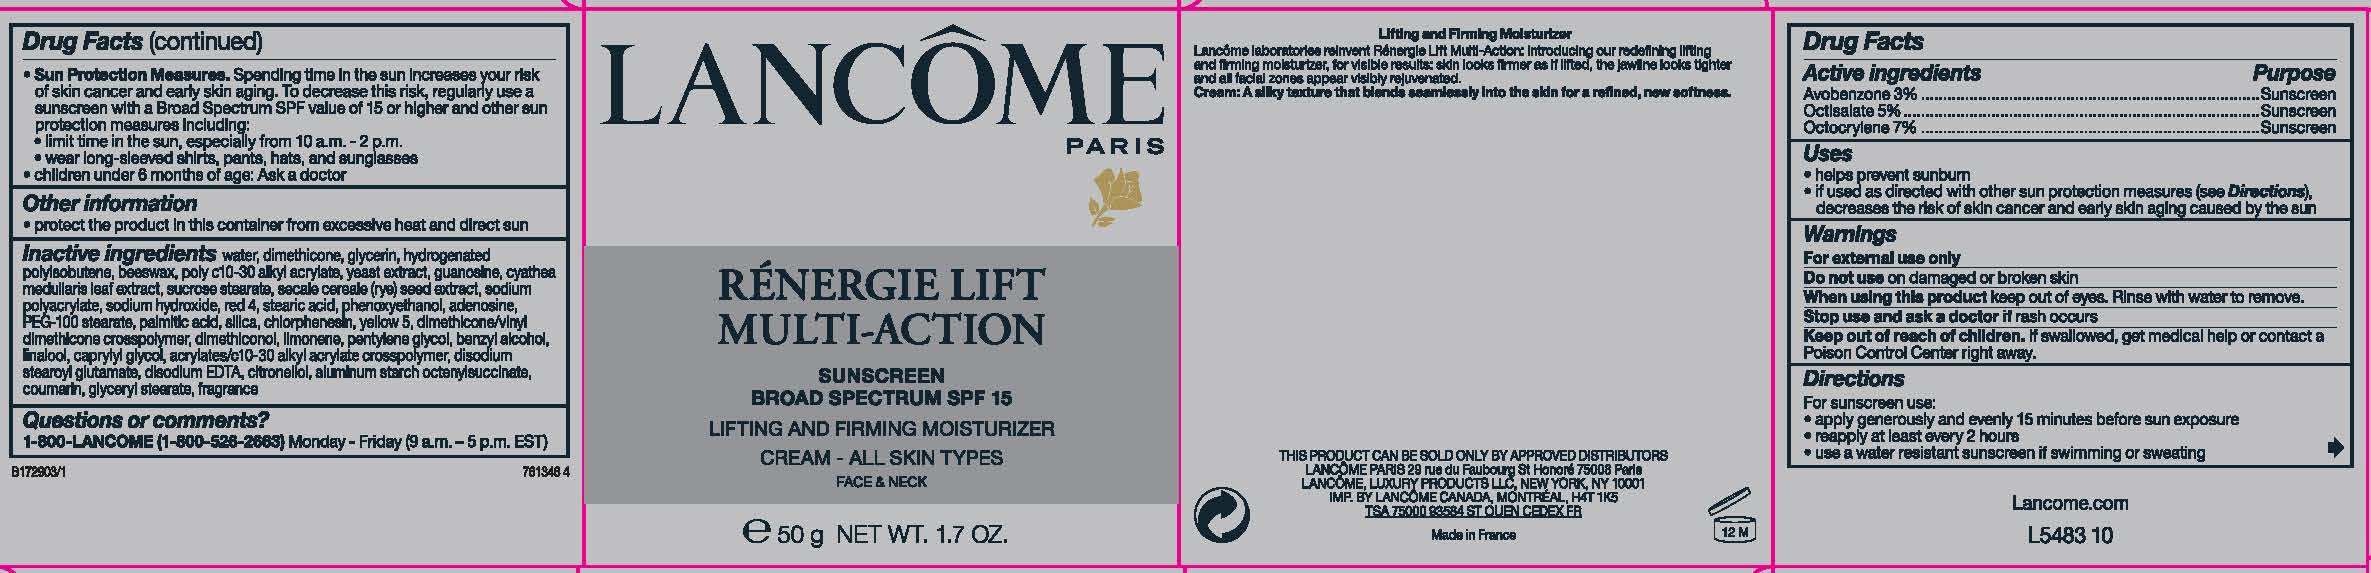 Lancome Paris Renergie Lift Multiaction Sunscreen Broad Spectrum Spf 15 Lift And Firming Face And Neck All Skin Types while Breastfeeding